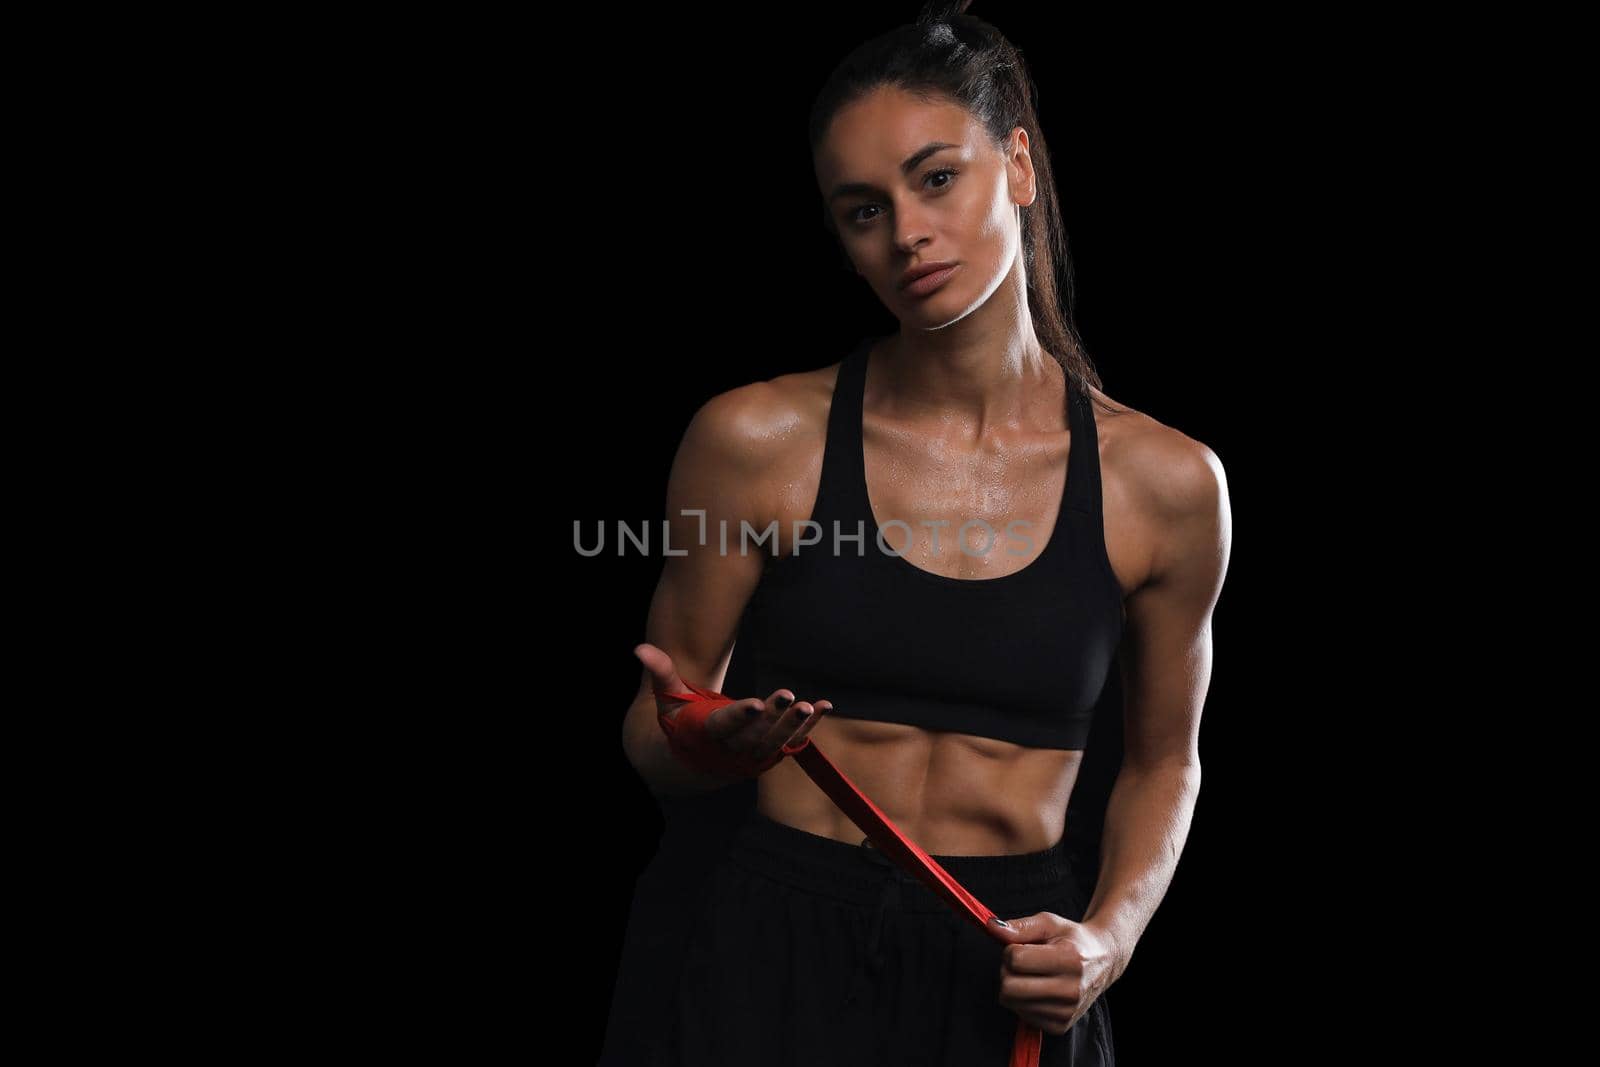 Beautiful and fit female fighter getting prepared for the fight or training, wrapping her hands with bandage tape against dark background. by tsyhun